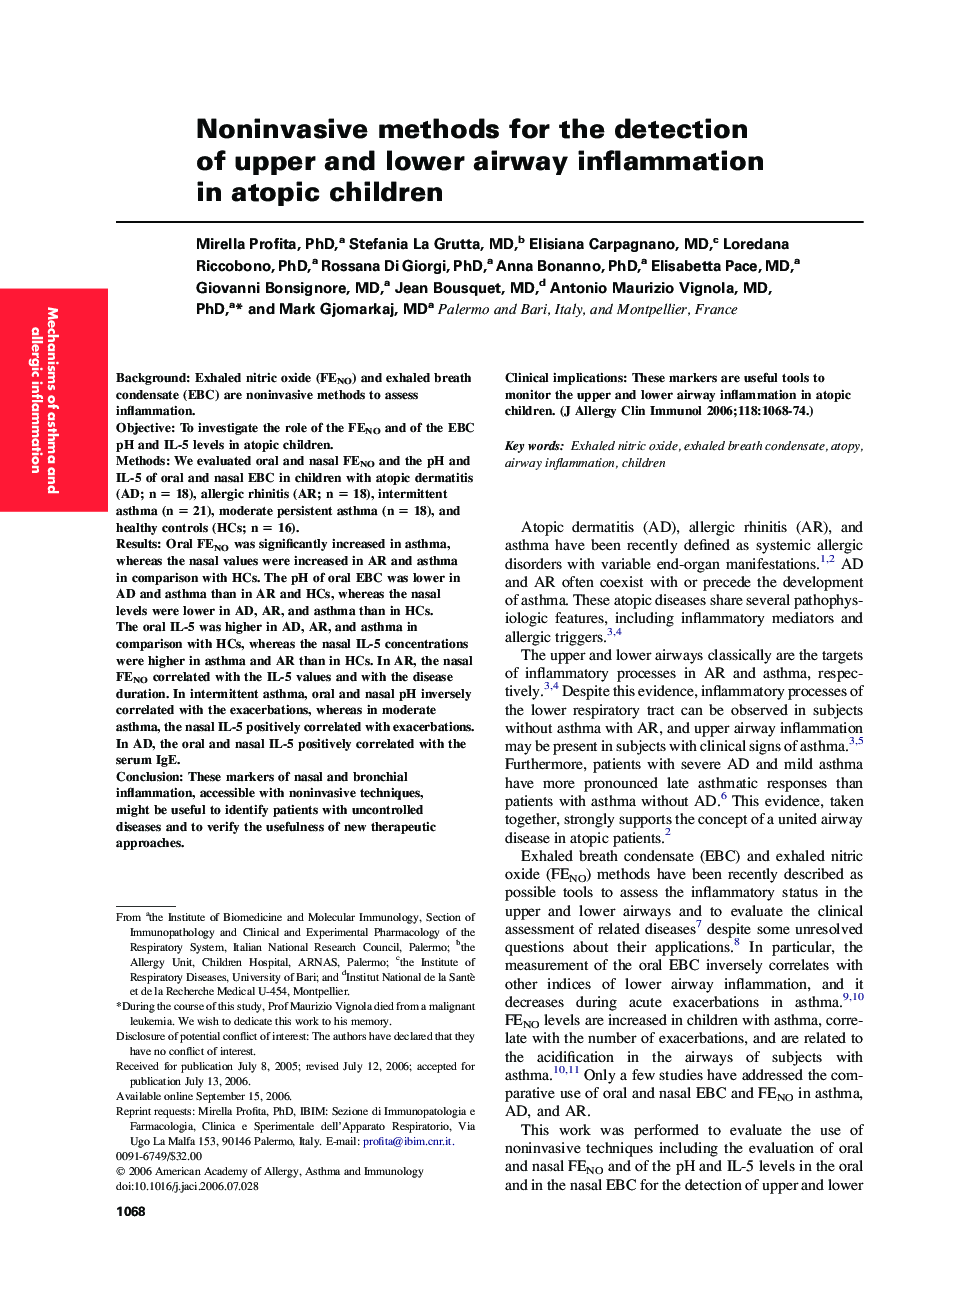 Noninvasive methods for the detection of upper and lower airway inflammation in atopic children 